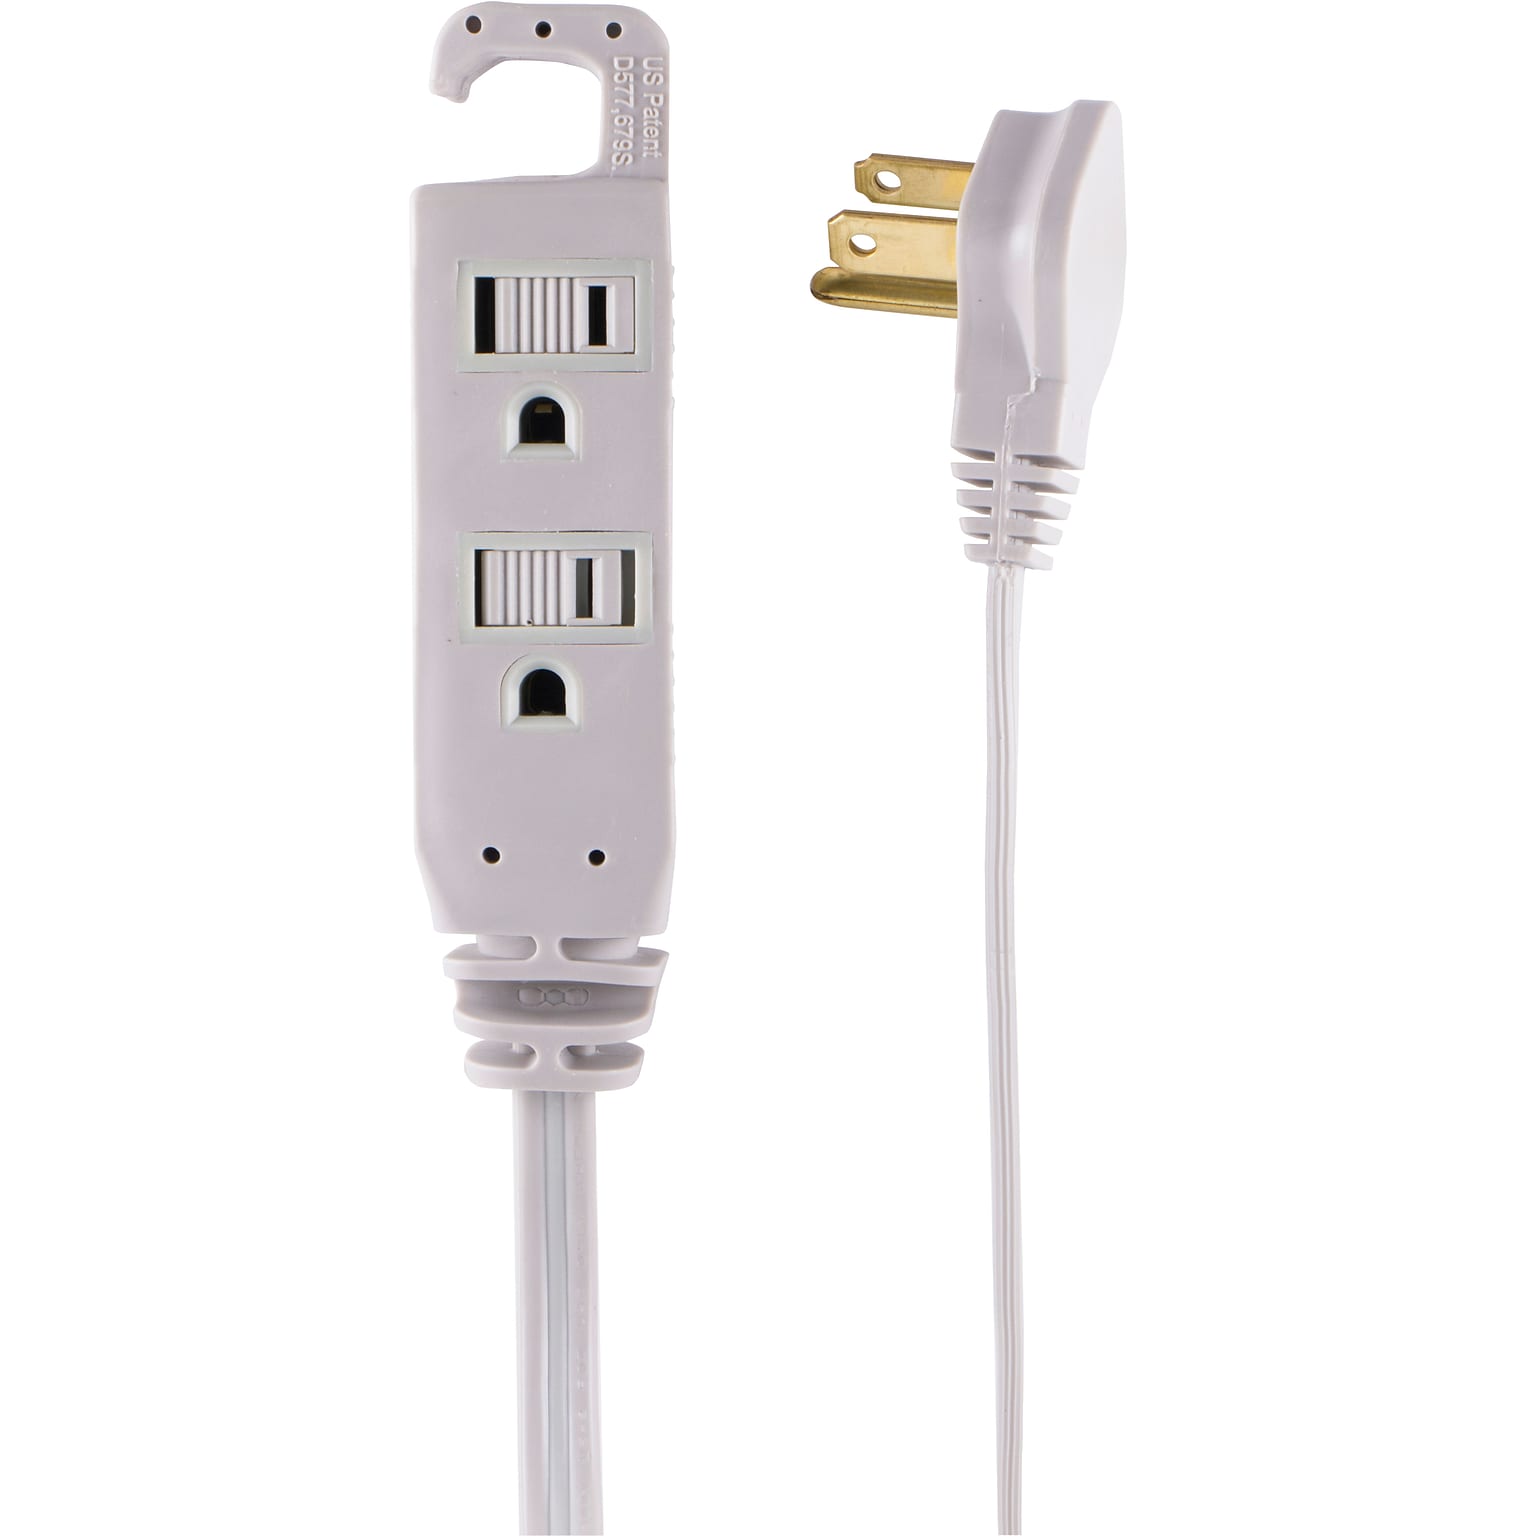 Quill Brand® 15 Extension Cord, 3-Outlet, Gray (ST22130-CC)